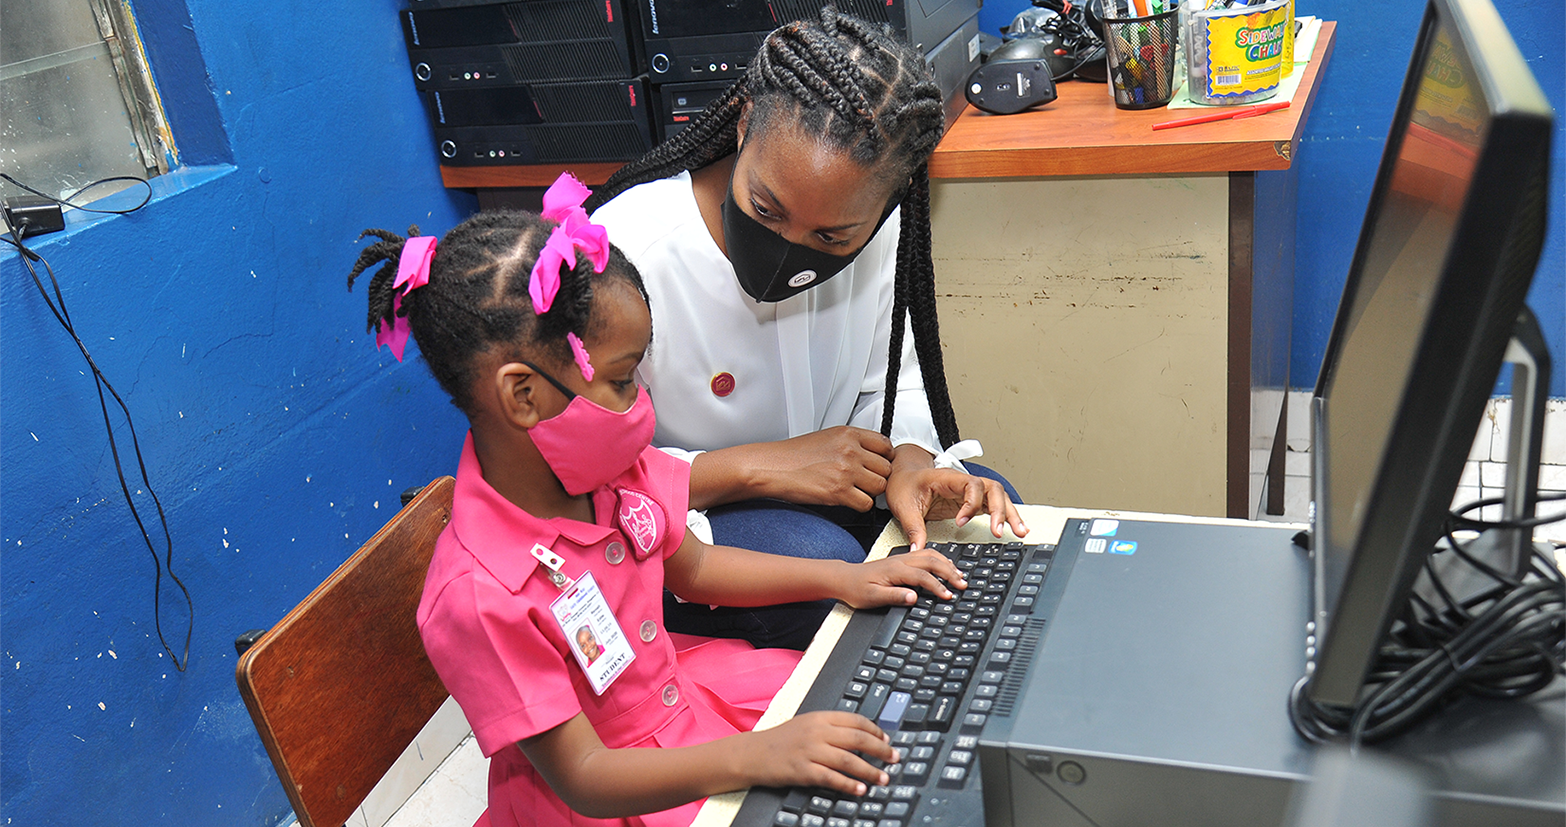 Regina Owen (right), Programme Administrator with the VM Foundation assists little Reniah Edite of the One Way Early Childhood Institution in using a computer donated to the school through Victoria Mutual Group’s ‘Refurbish for Change’ initiative. The school was one of several institutions which received over 130 computers, which were refurbished for use by the VM’s Group Information Communication Technology Unit.